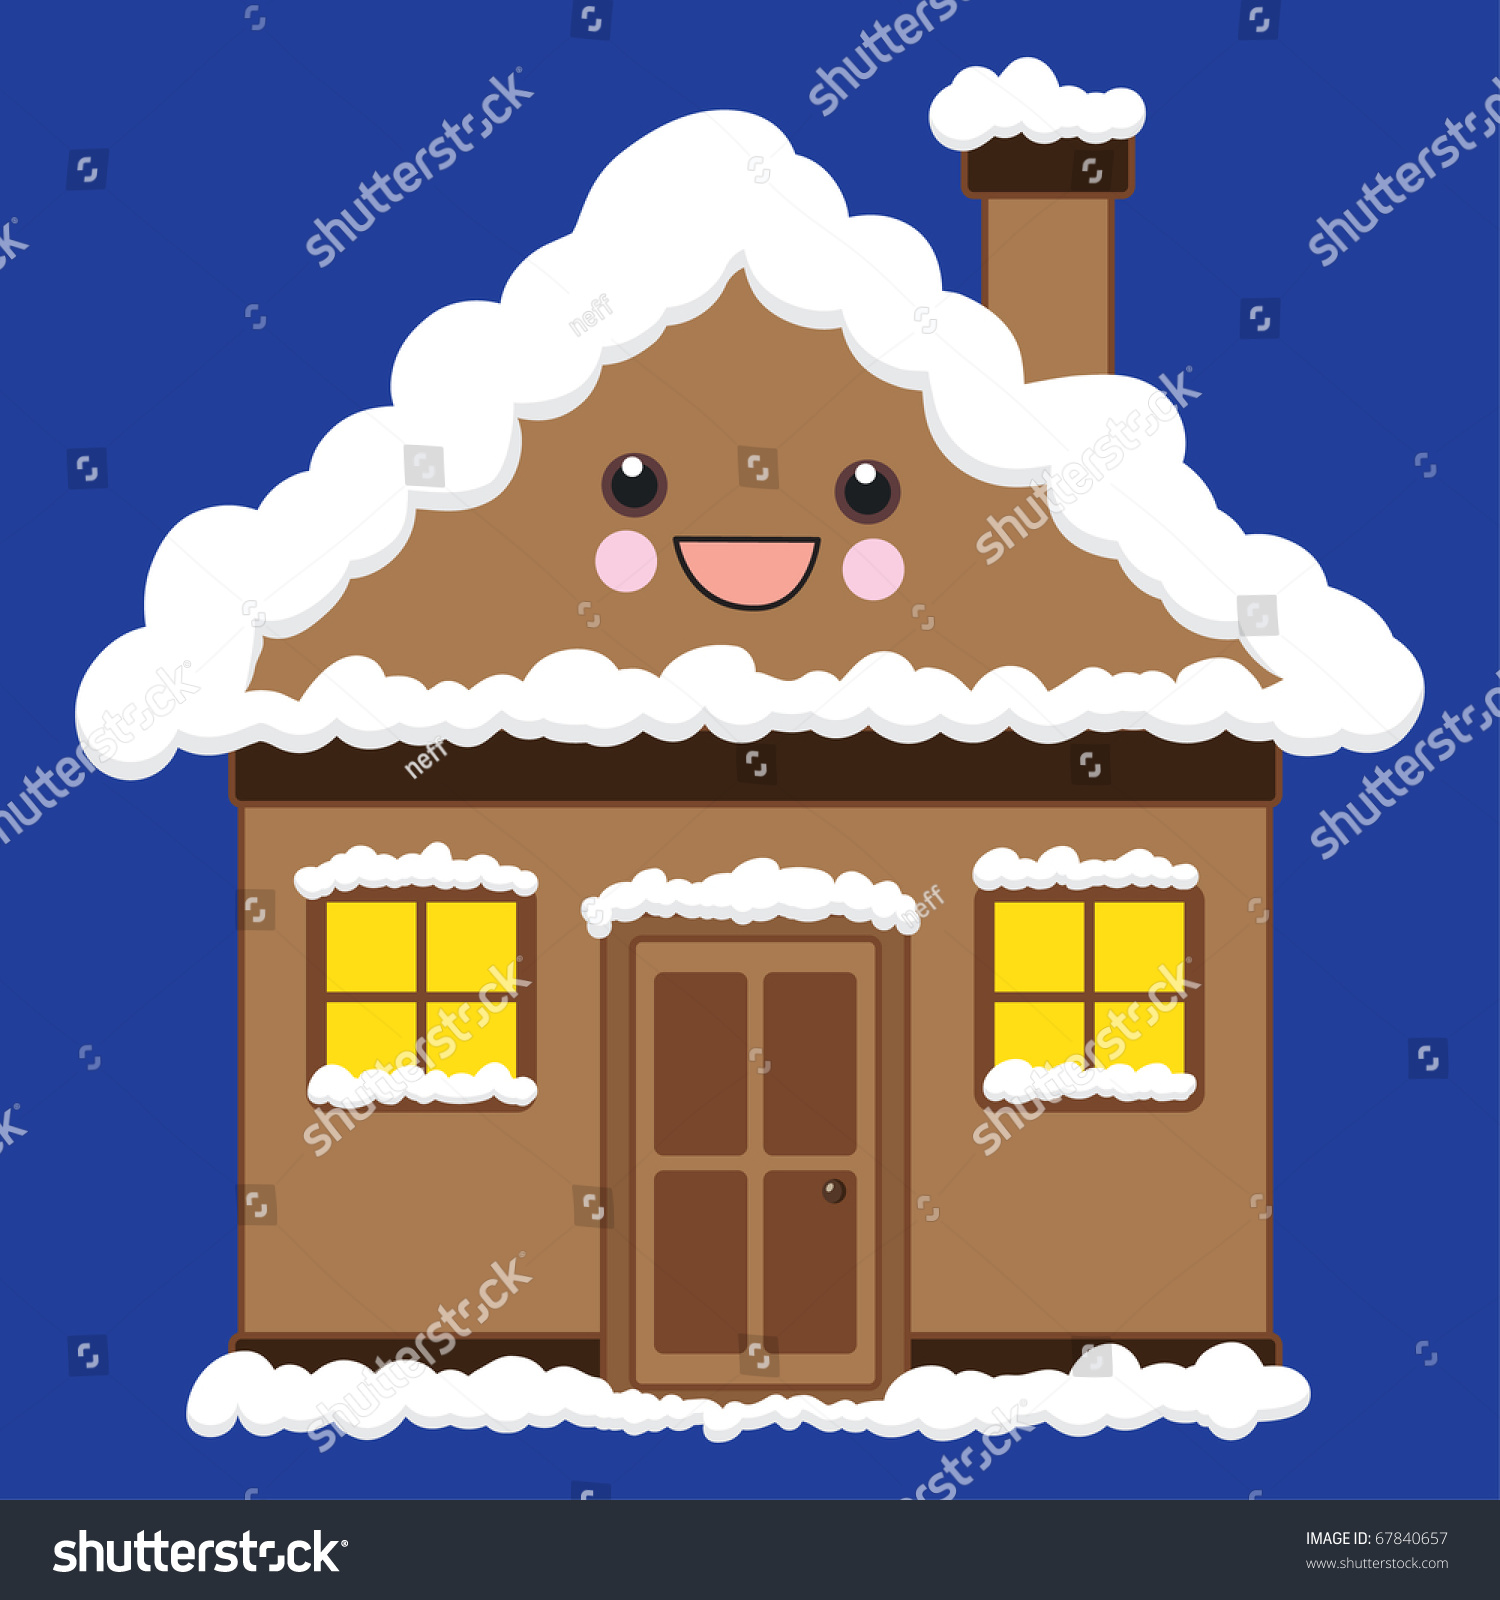 clipart house with snow - photo #27